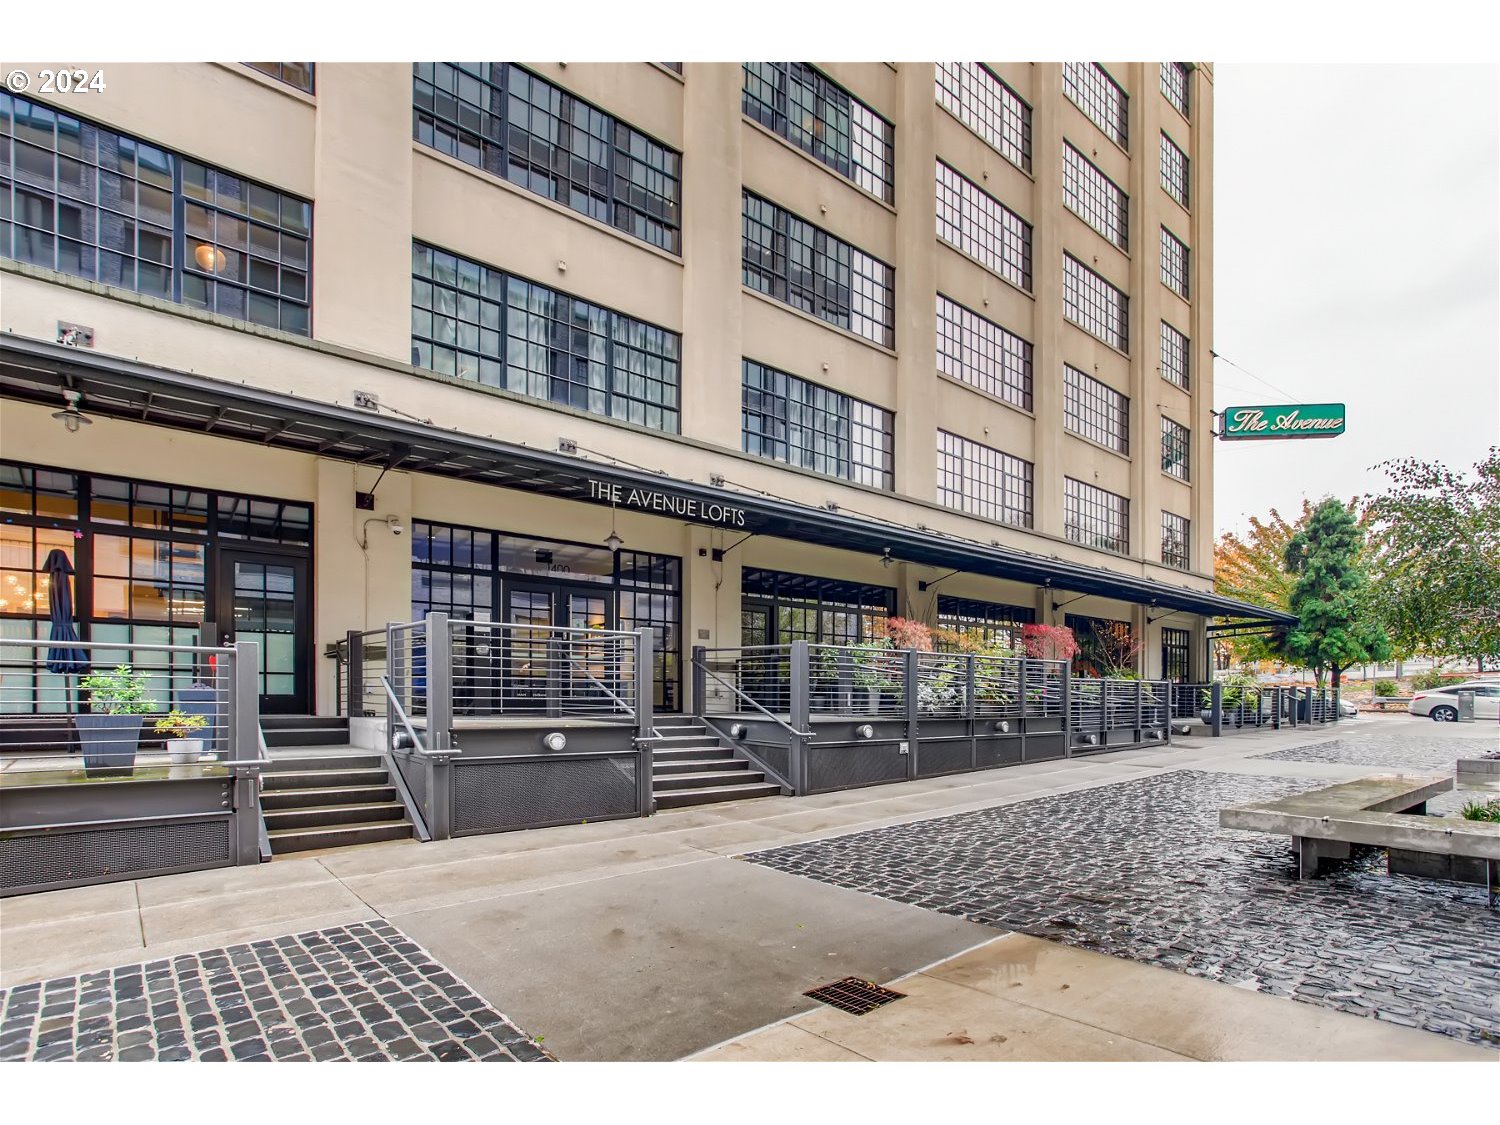 You might also be interested in AVENUE LOFTS